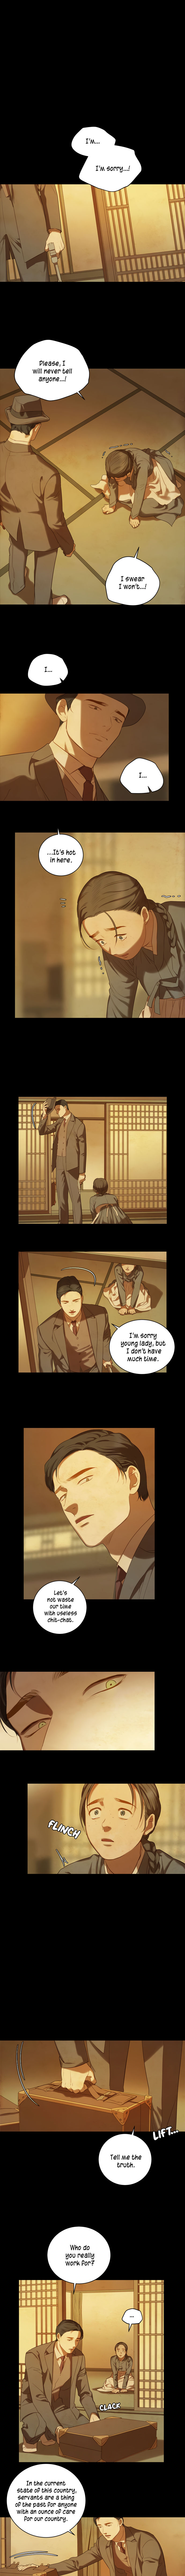 Gorae Byul – The Gyeongseong Mermaid Chapter 8 - Page 1